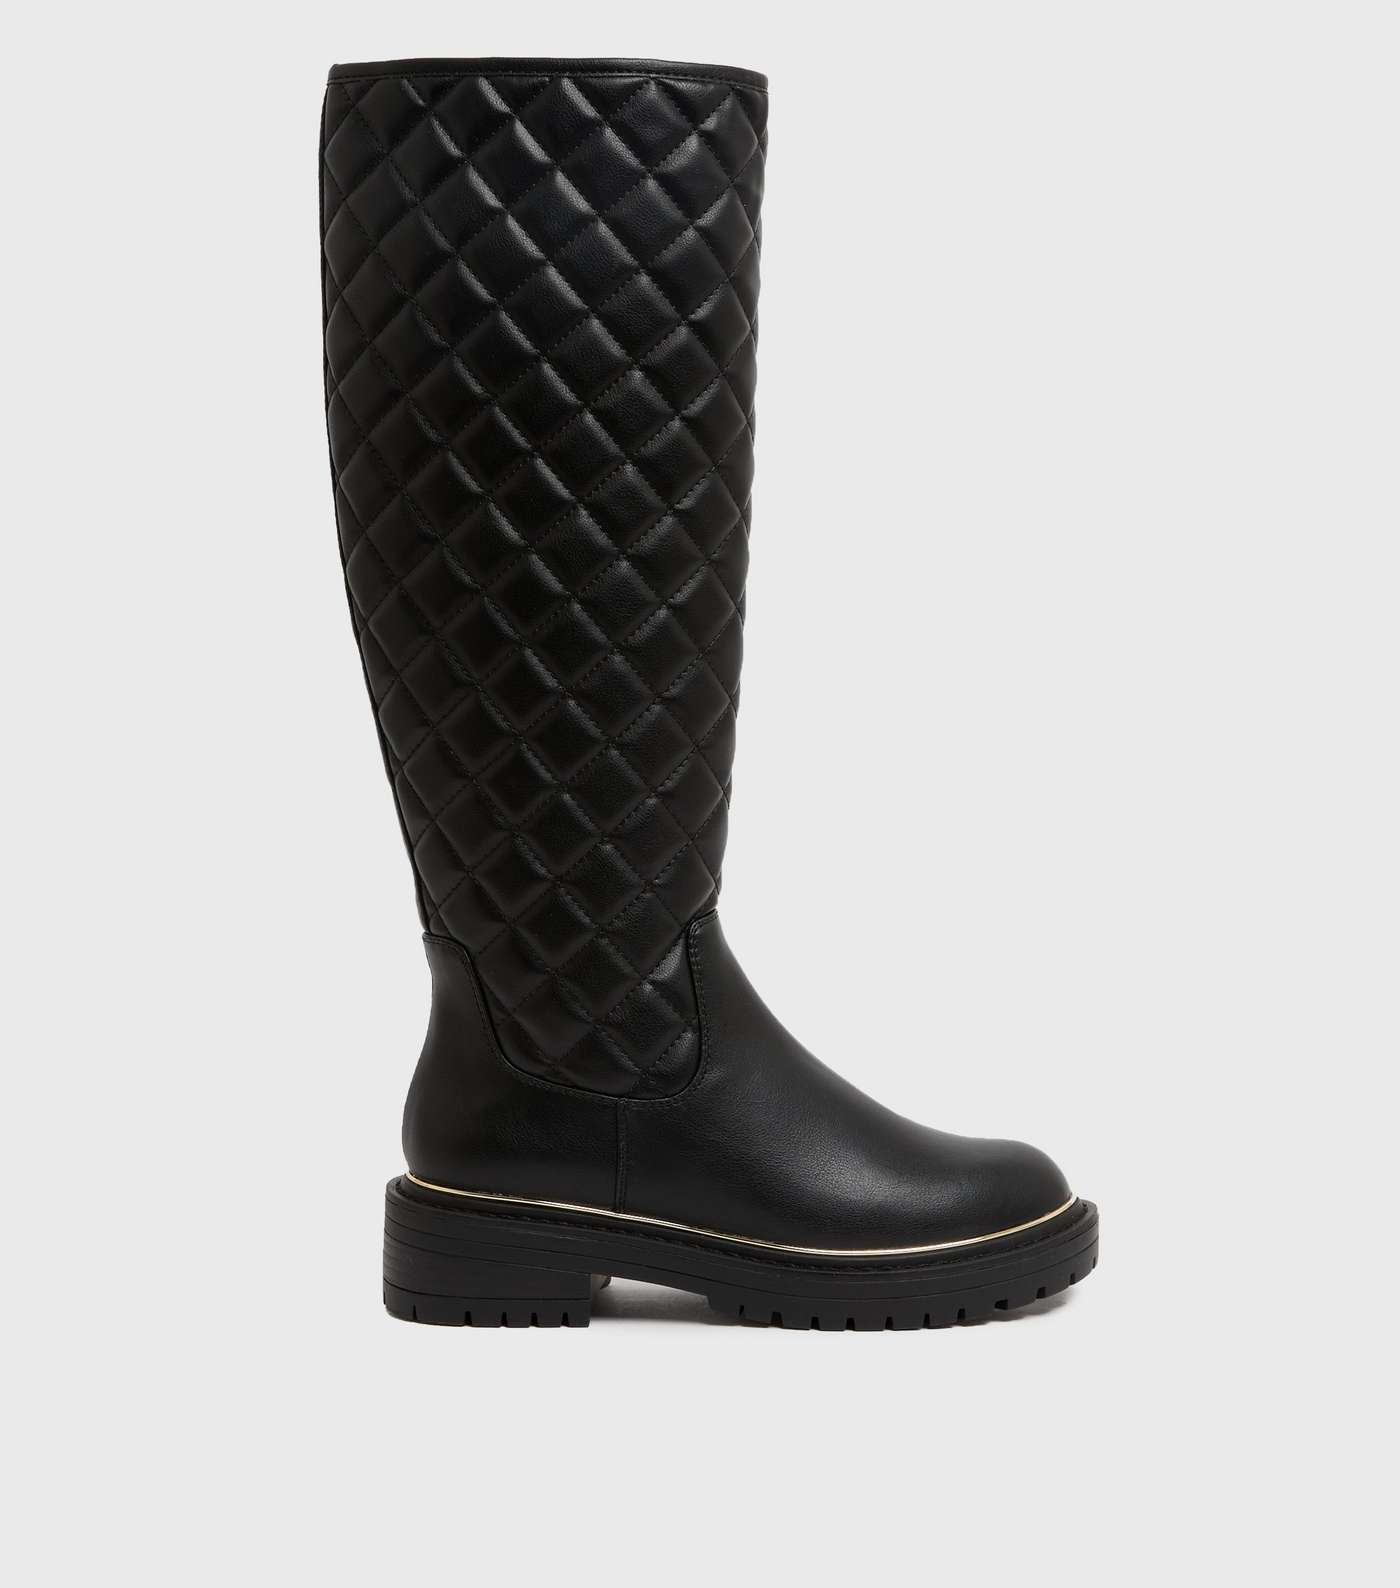 Black Quilted Metal Trim Knee High Boots